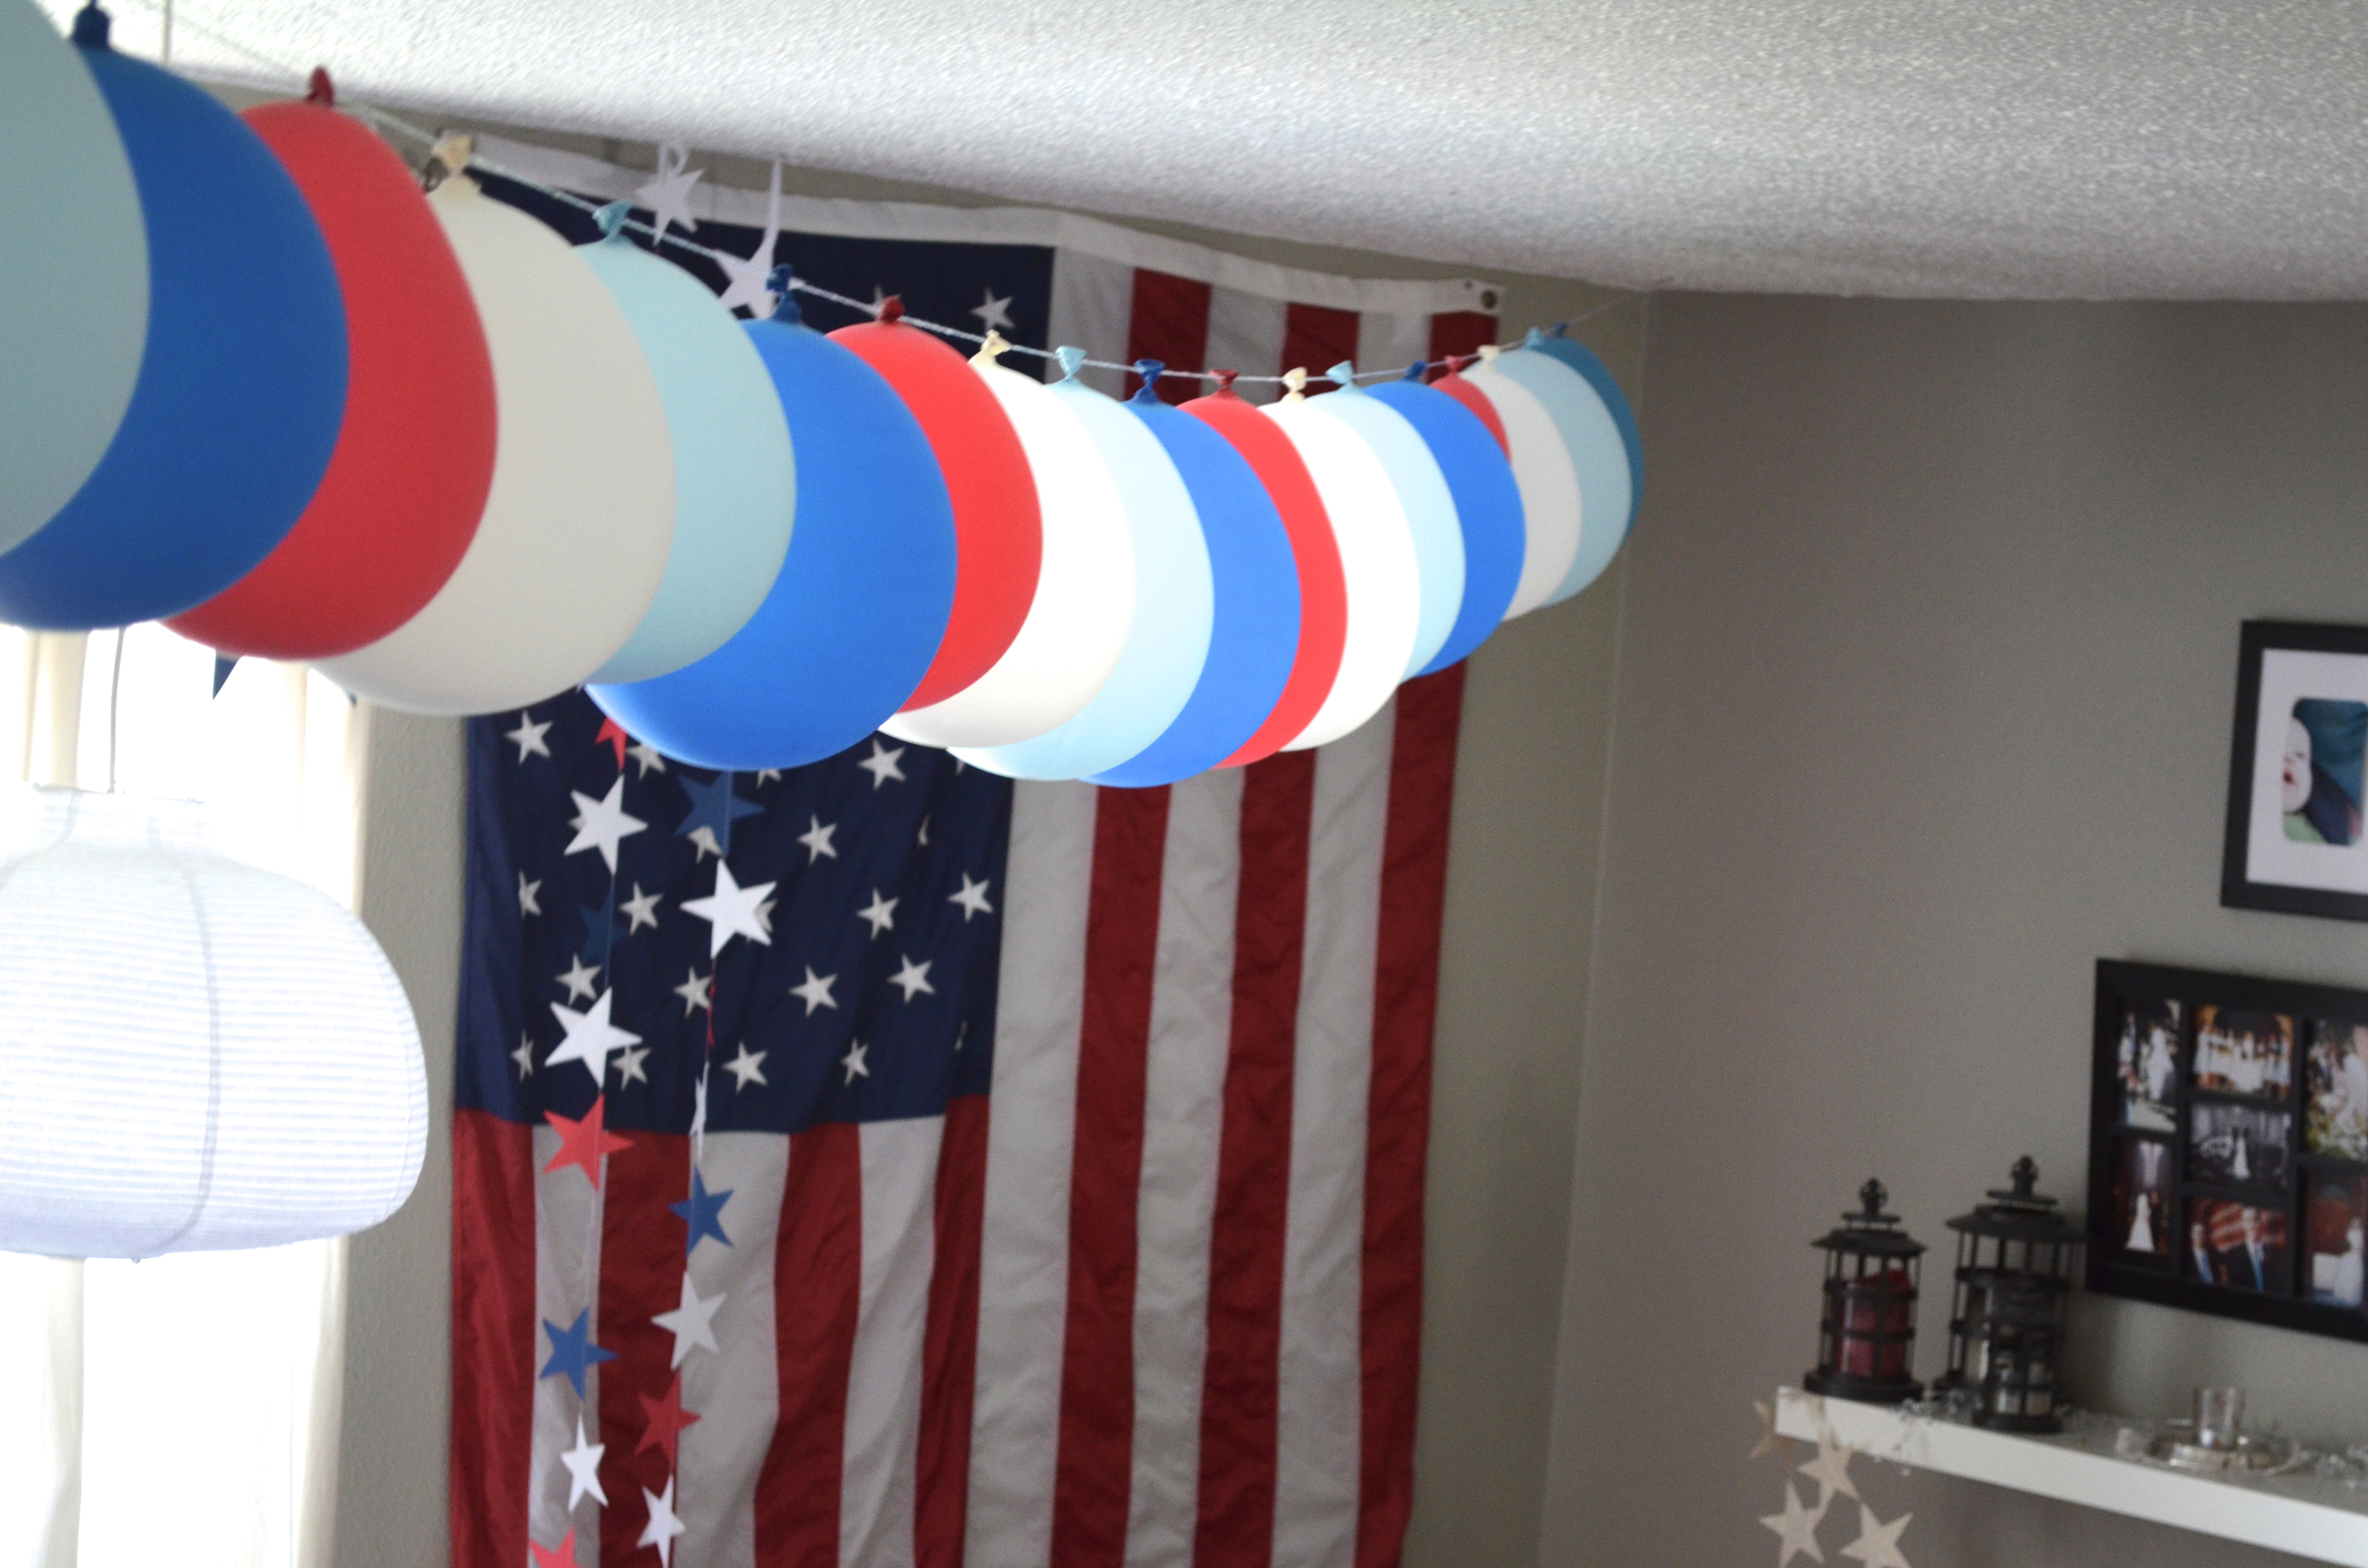 how Tuesday: DIY Balloon Garland Tutorial from the Path Less Traveled